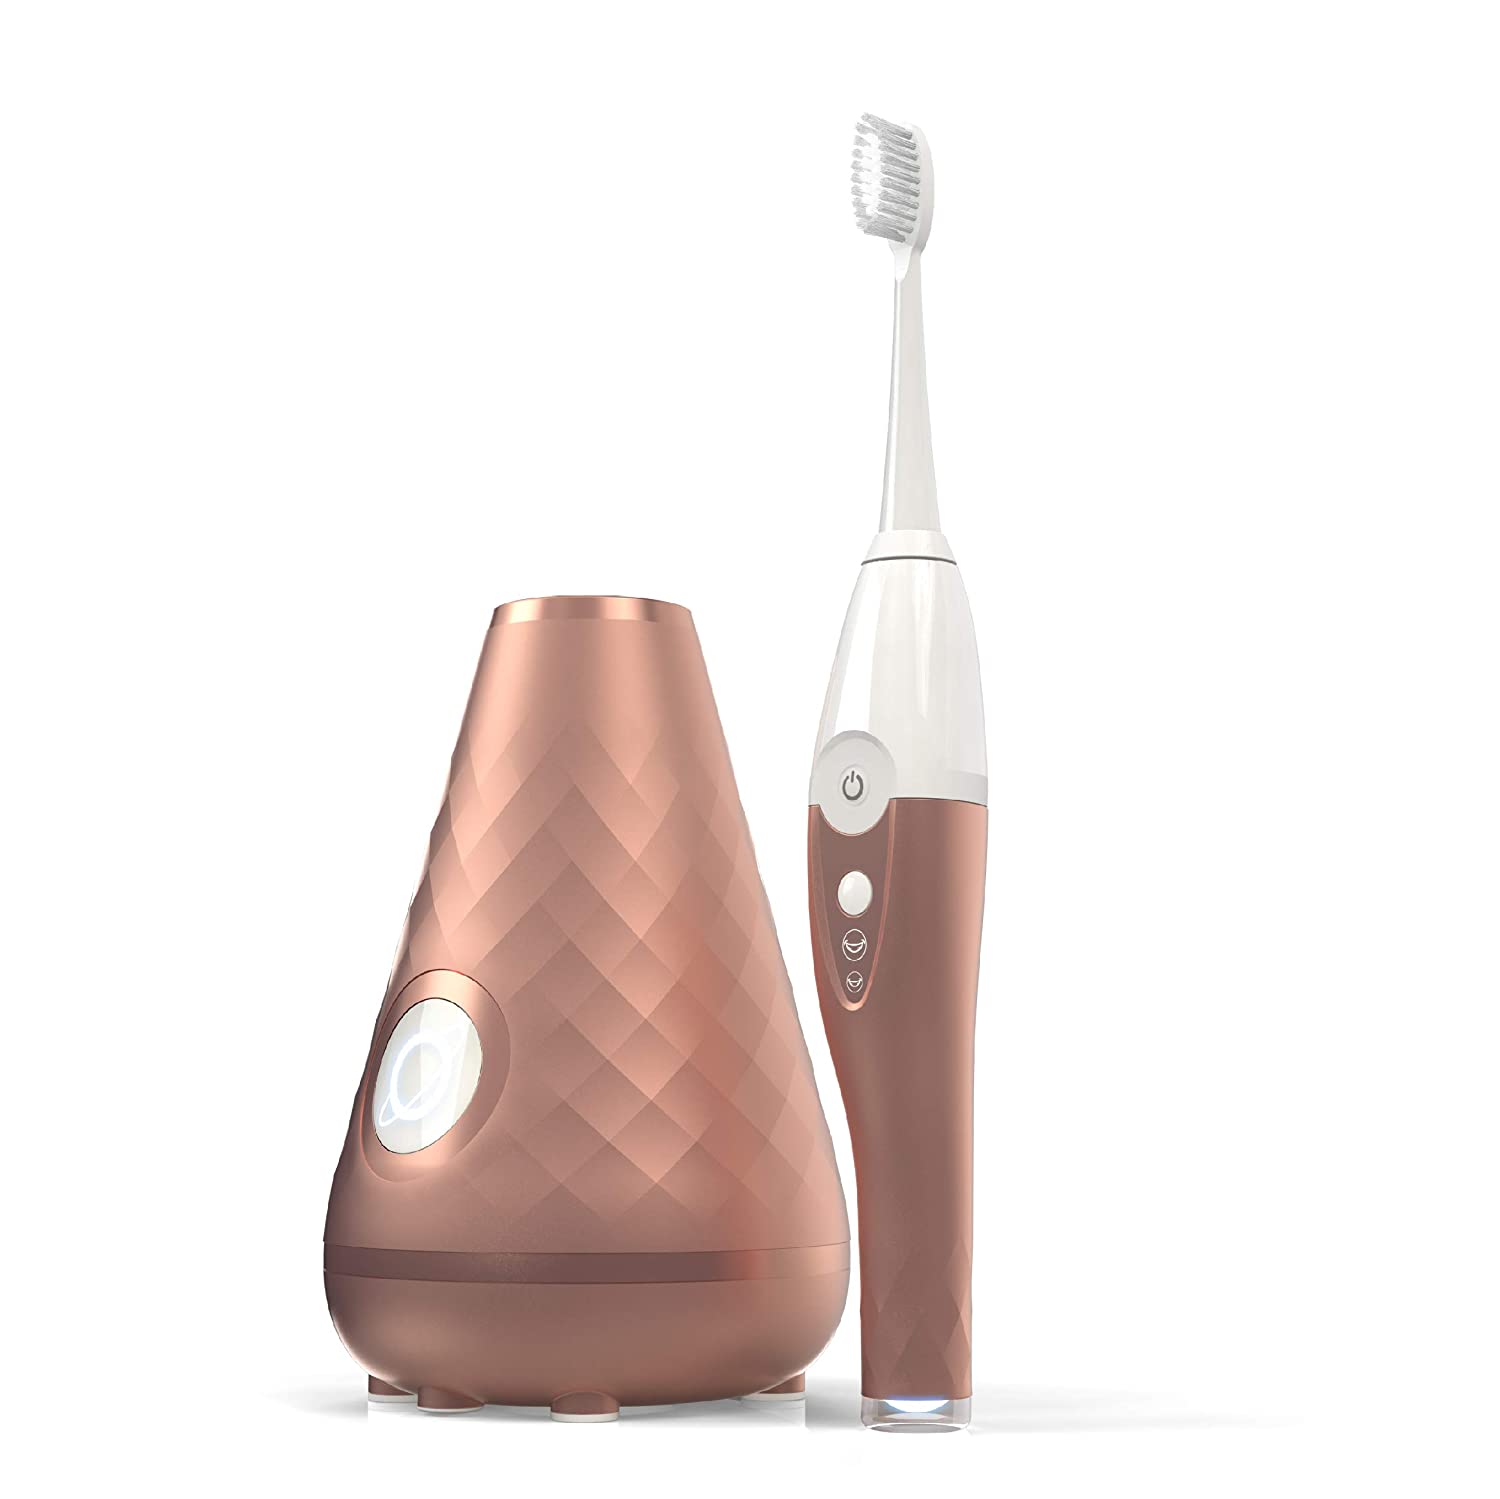 Tao Clean Umma Diamond Sonic Toothbrush and Cleaning Station, Electric Toothbrush with Patented Docking Technology, Ergonomic Handle, Dual Speed Settings, Rose Gold